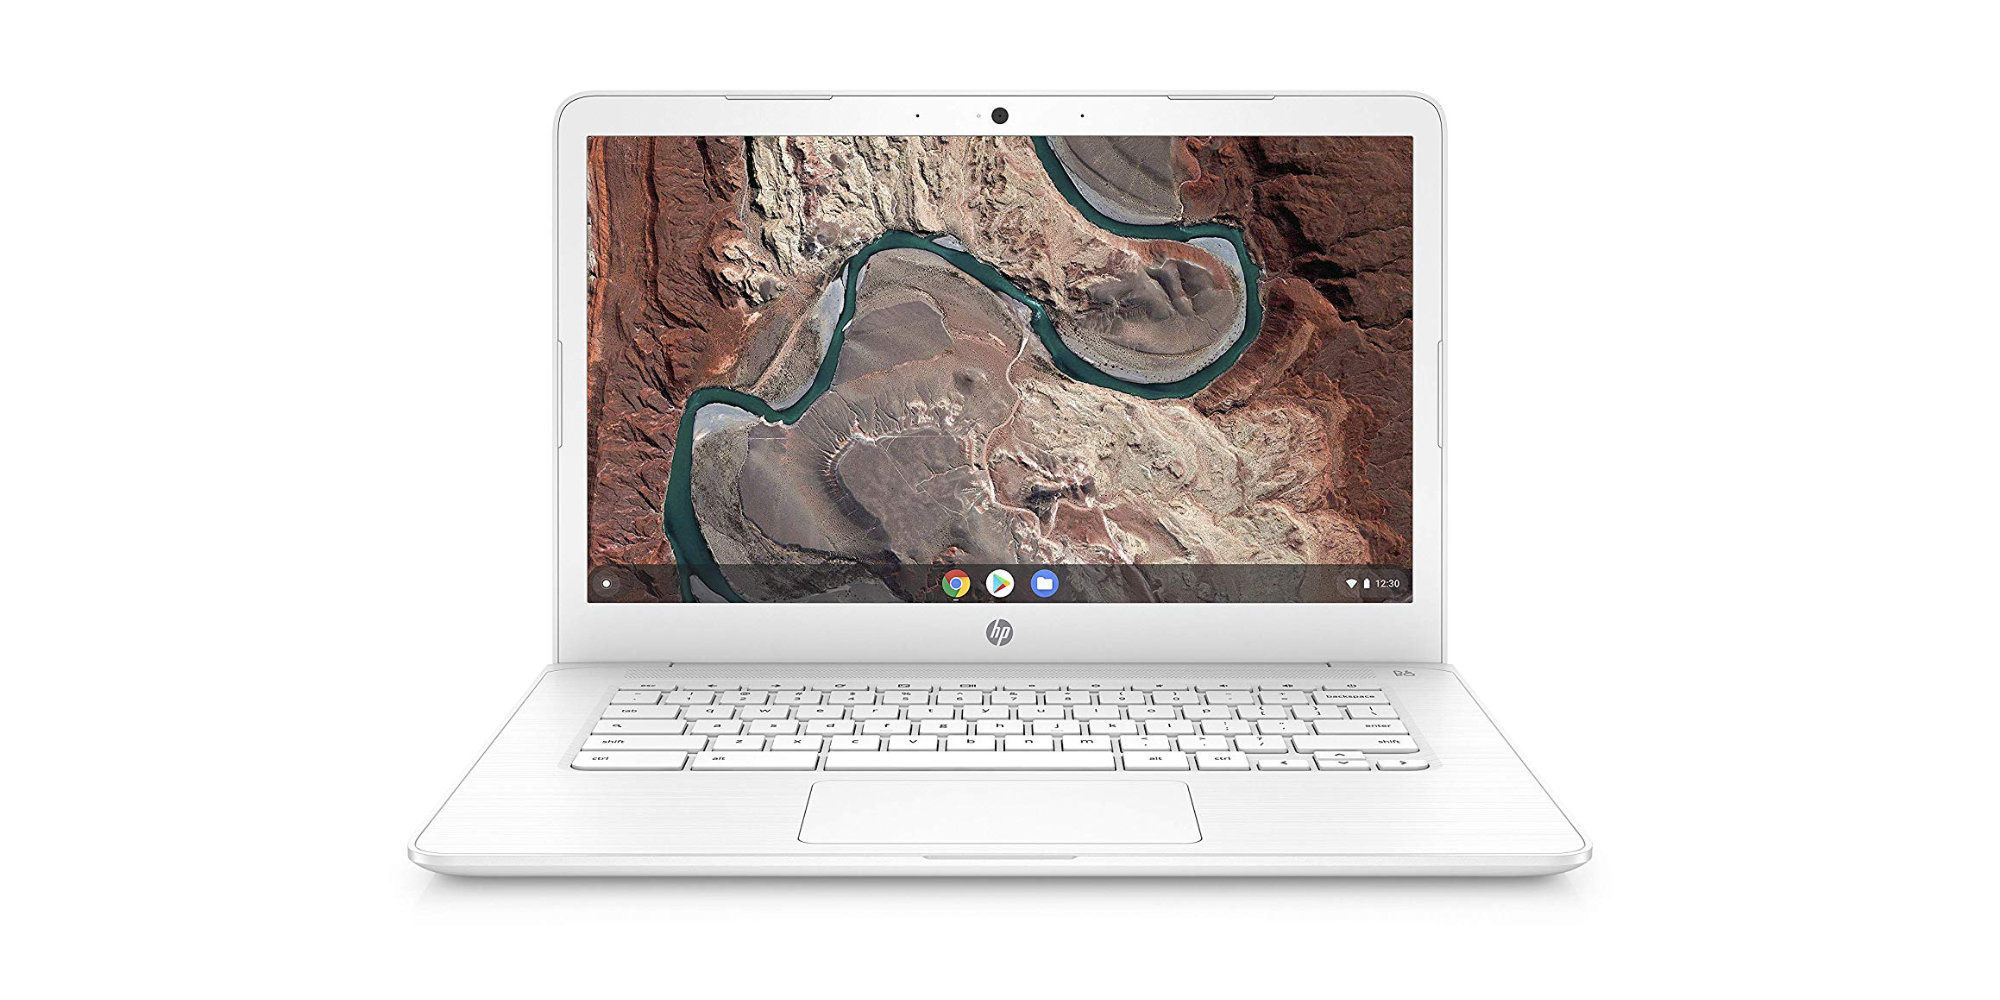 Amazon slashes up to $90 off HP's 14-inch Chromebook, now $190